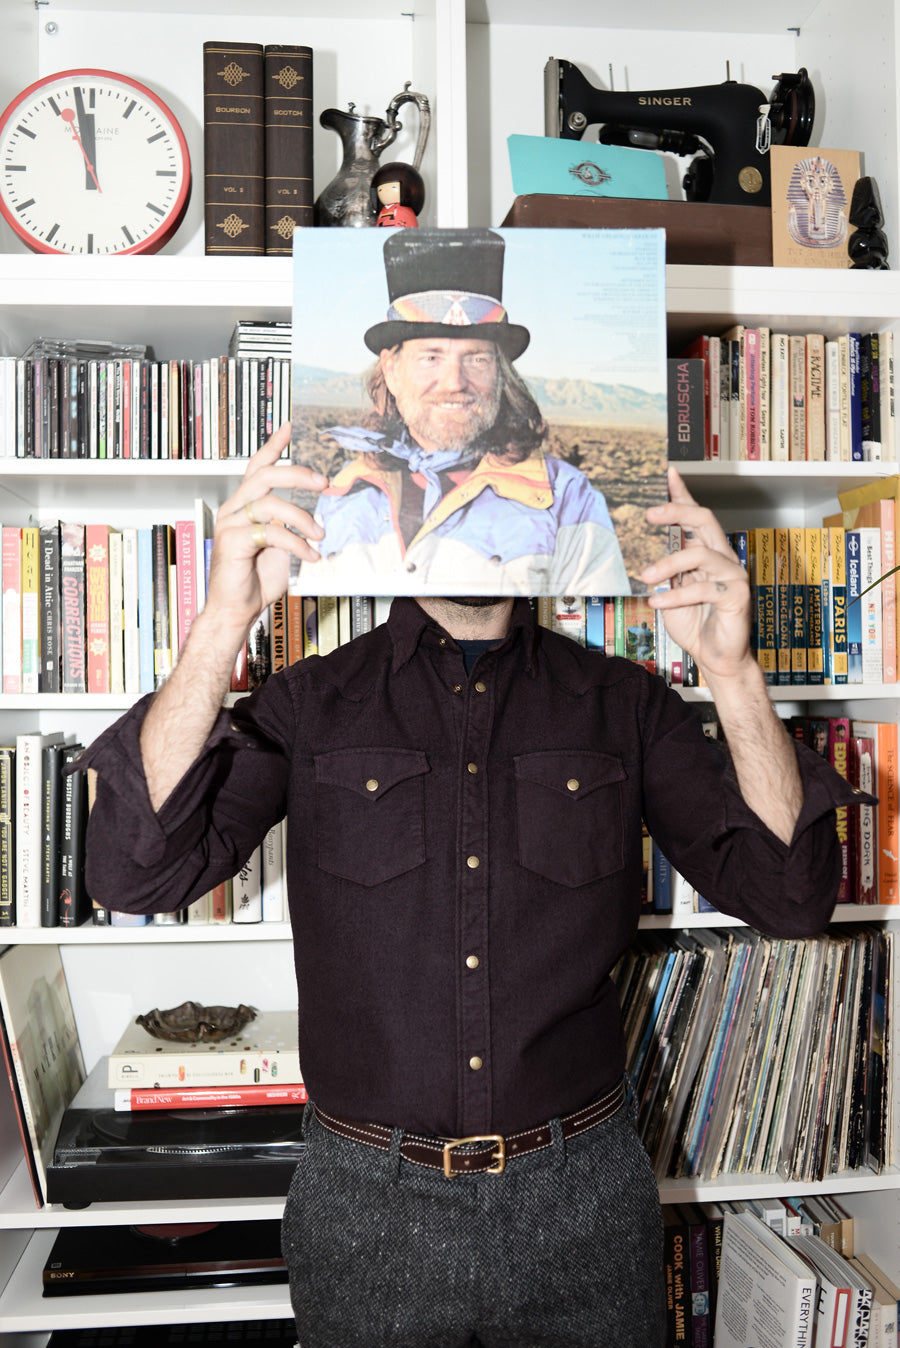 Dylan shot in front of a bookcase holding a Willie Nelson record over his face. He is wearing a burgundy western shirt.